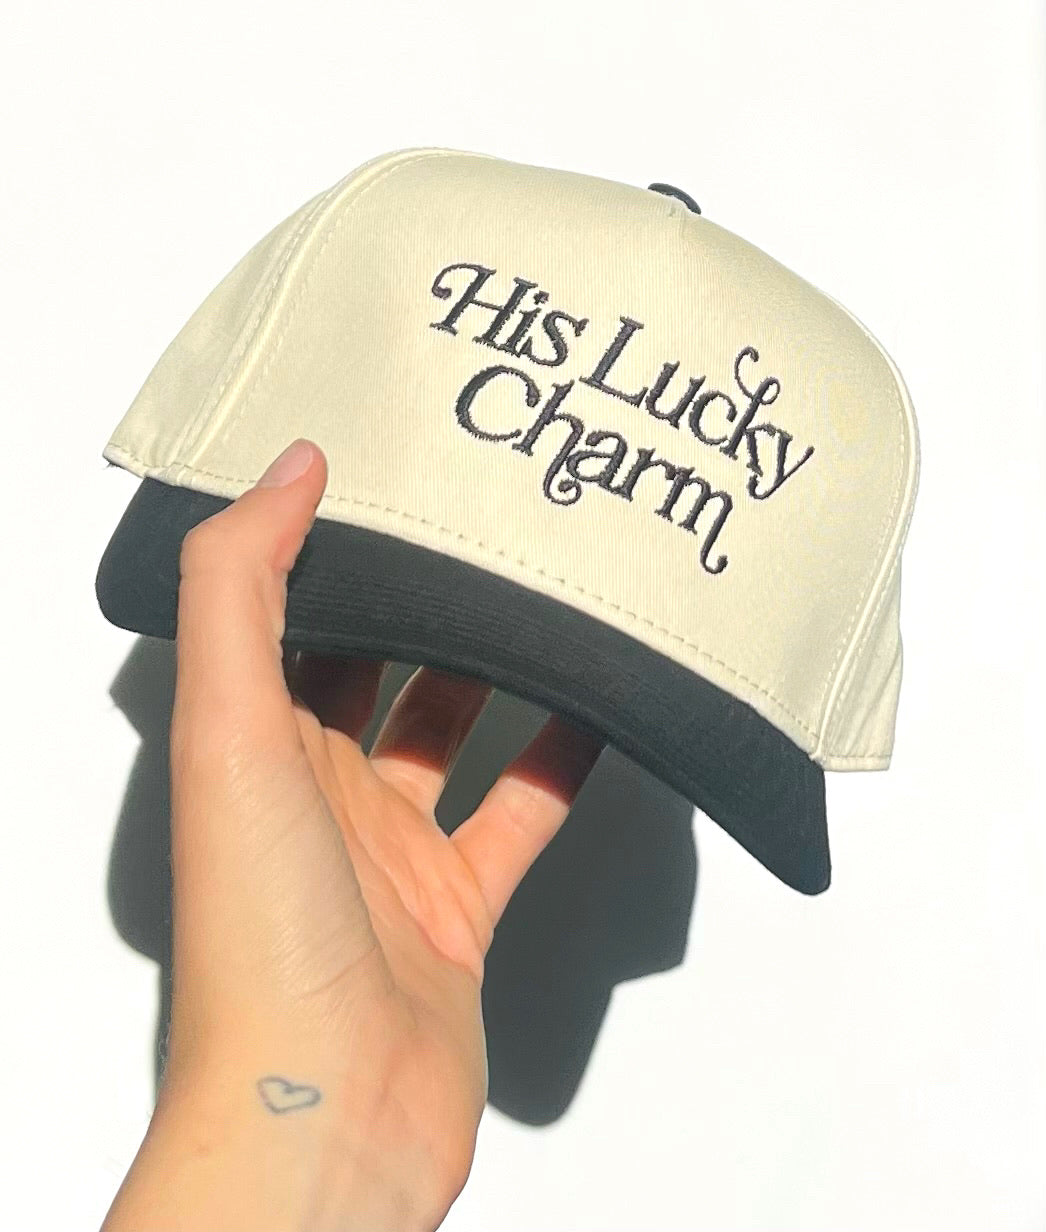 “His Lucky Charm” Vintage Trucker Hat